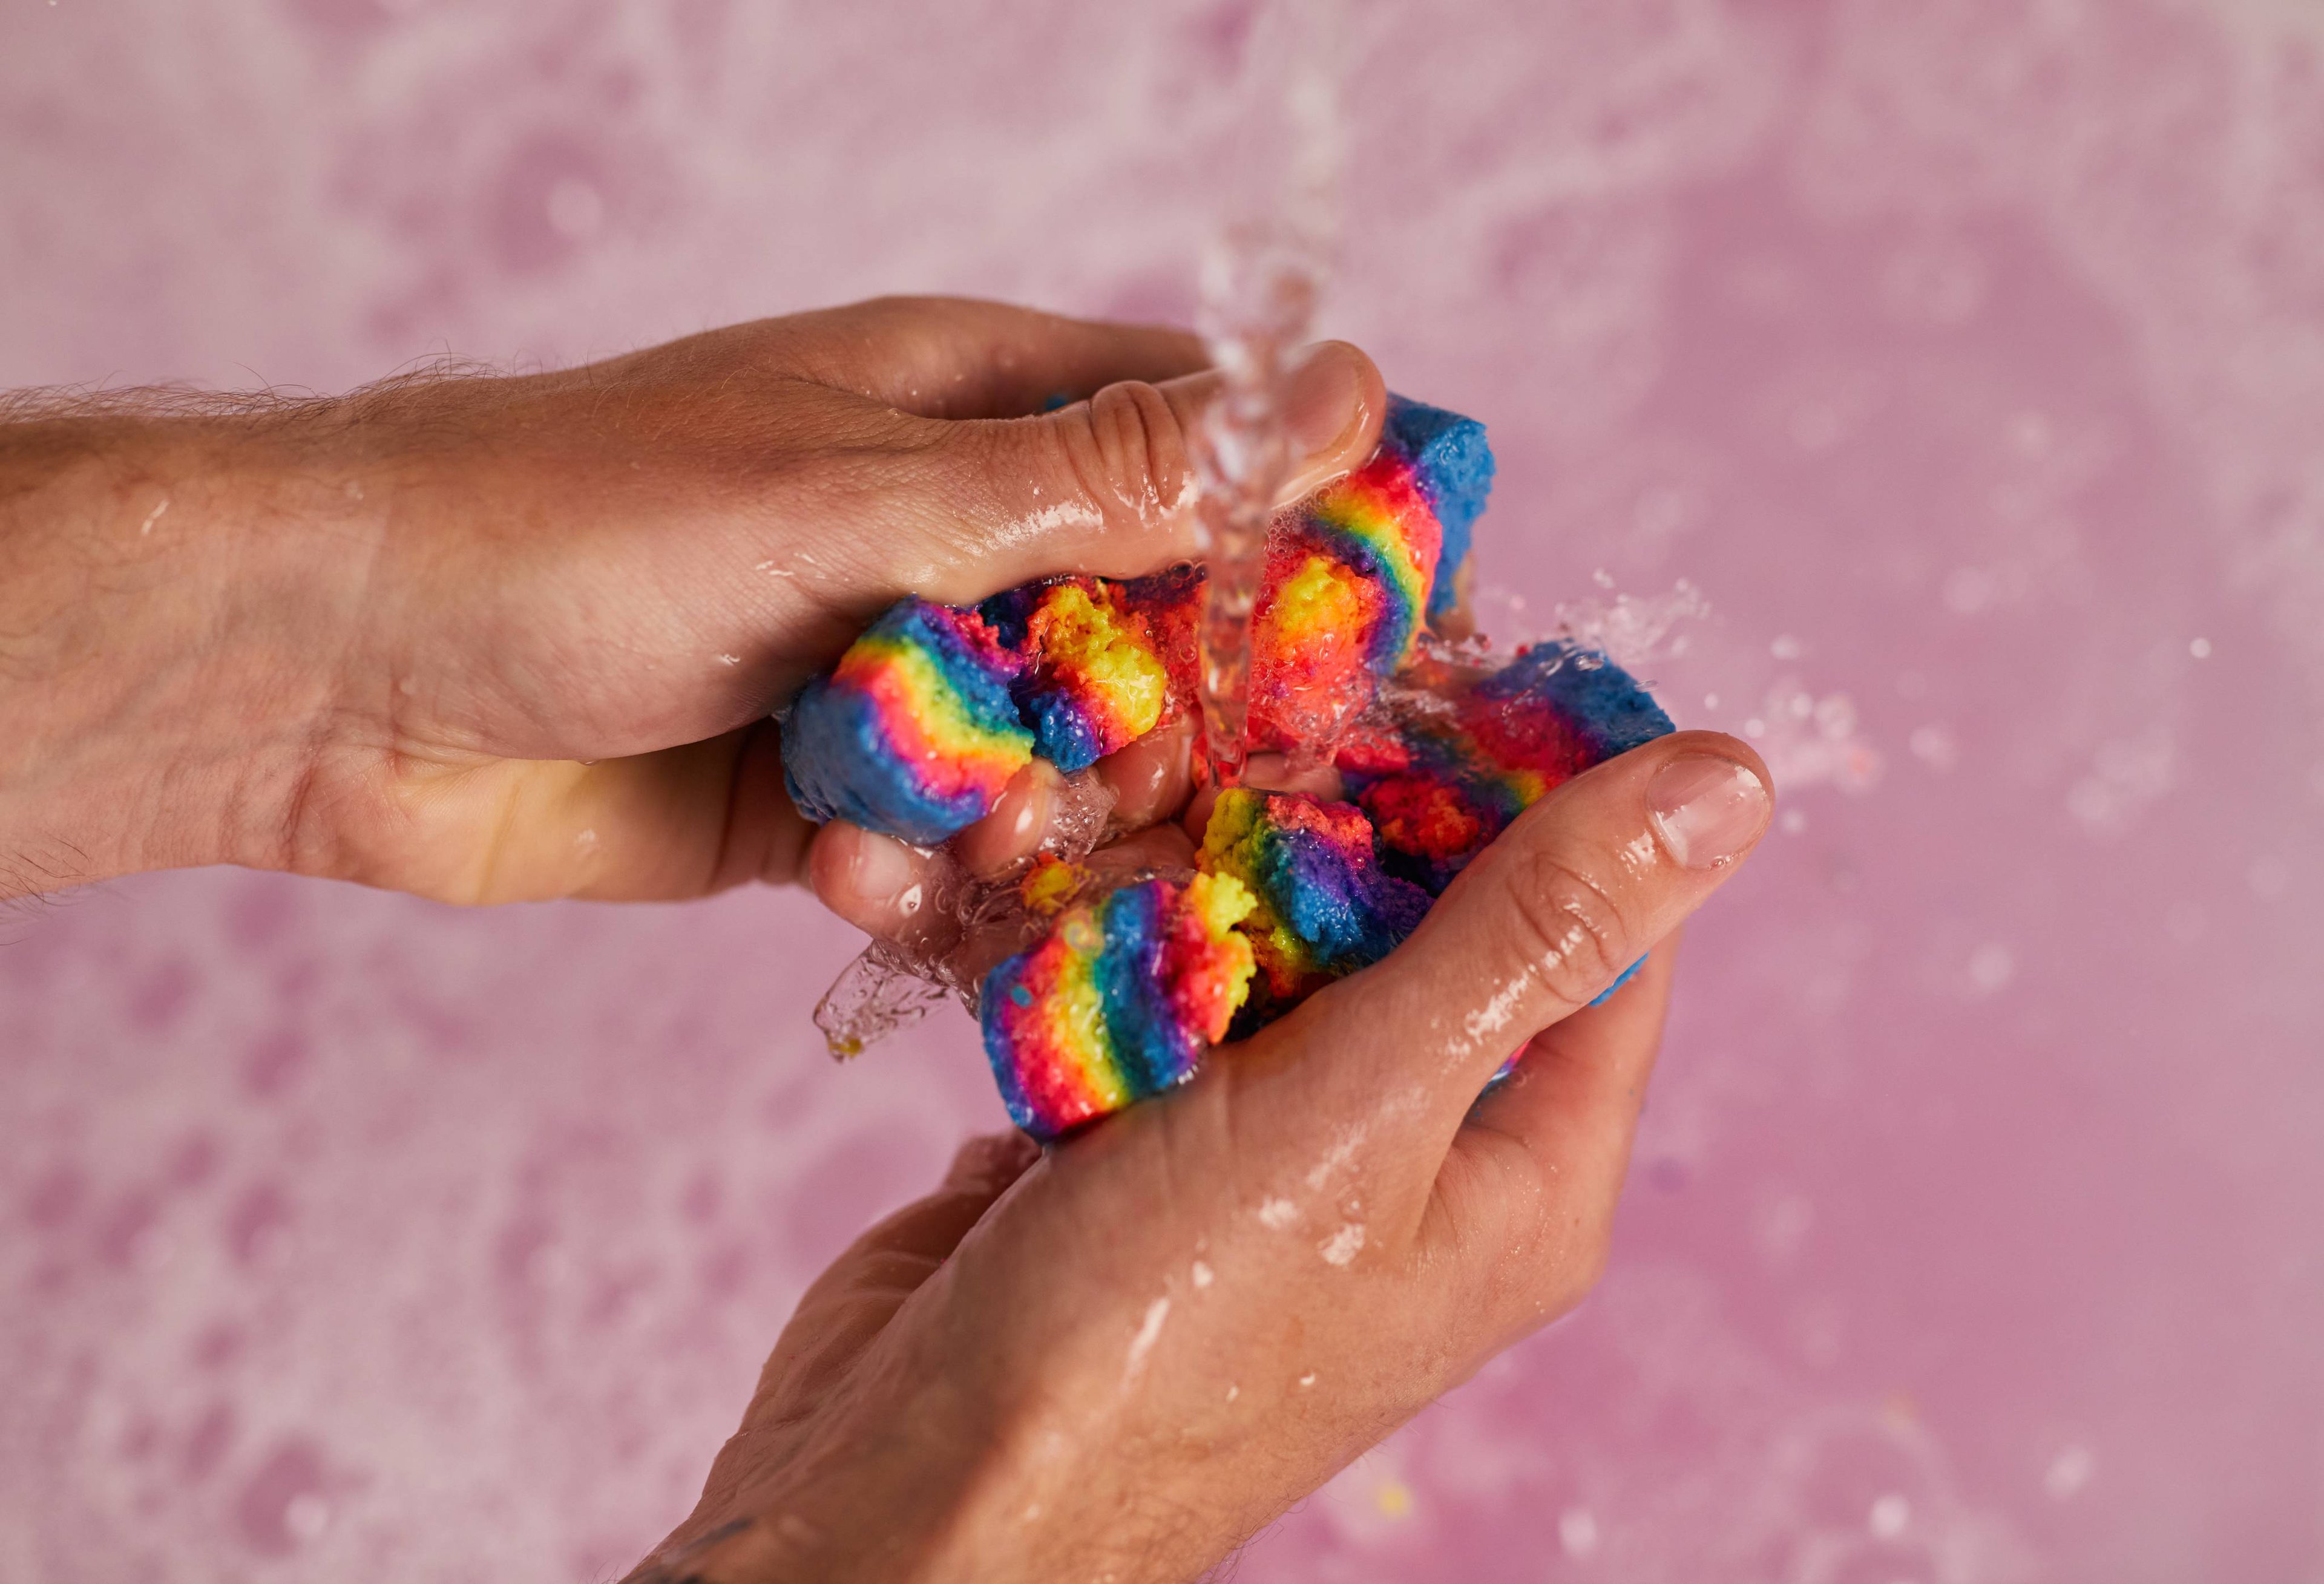 Image shows the model crumbling the Intergalactic bubble bar with both hands under running water. 